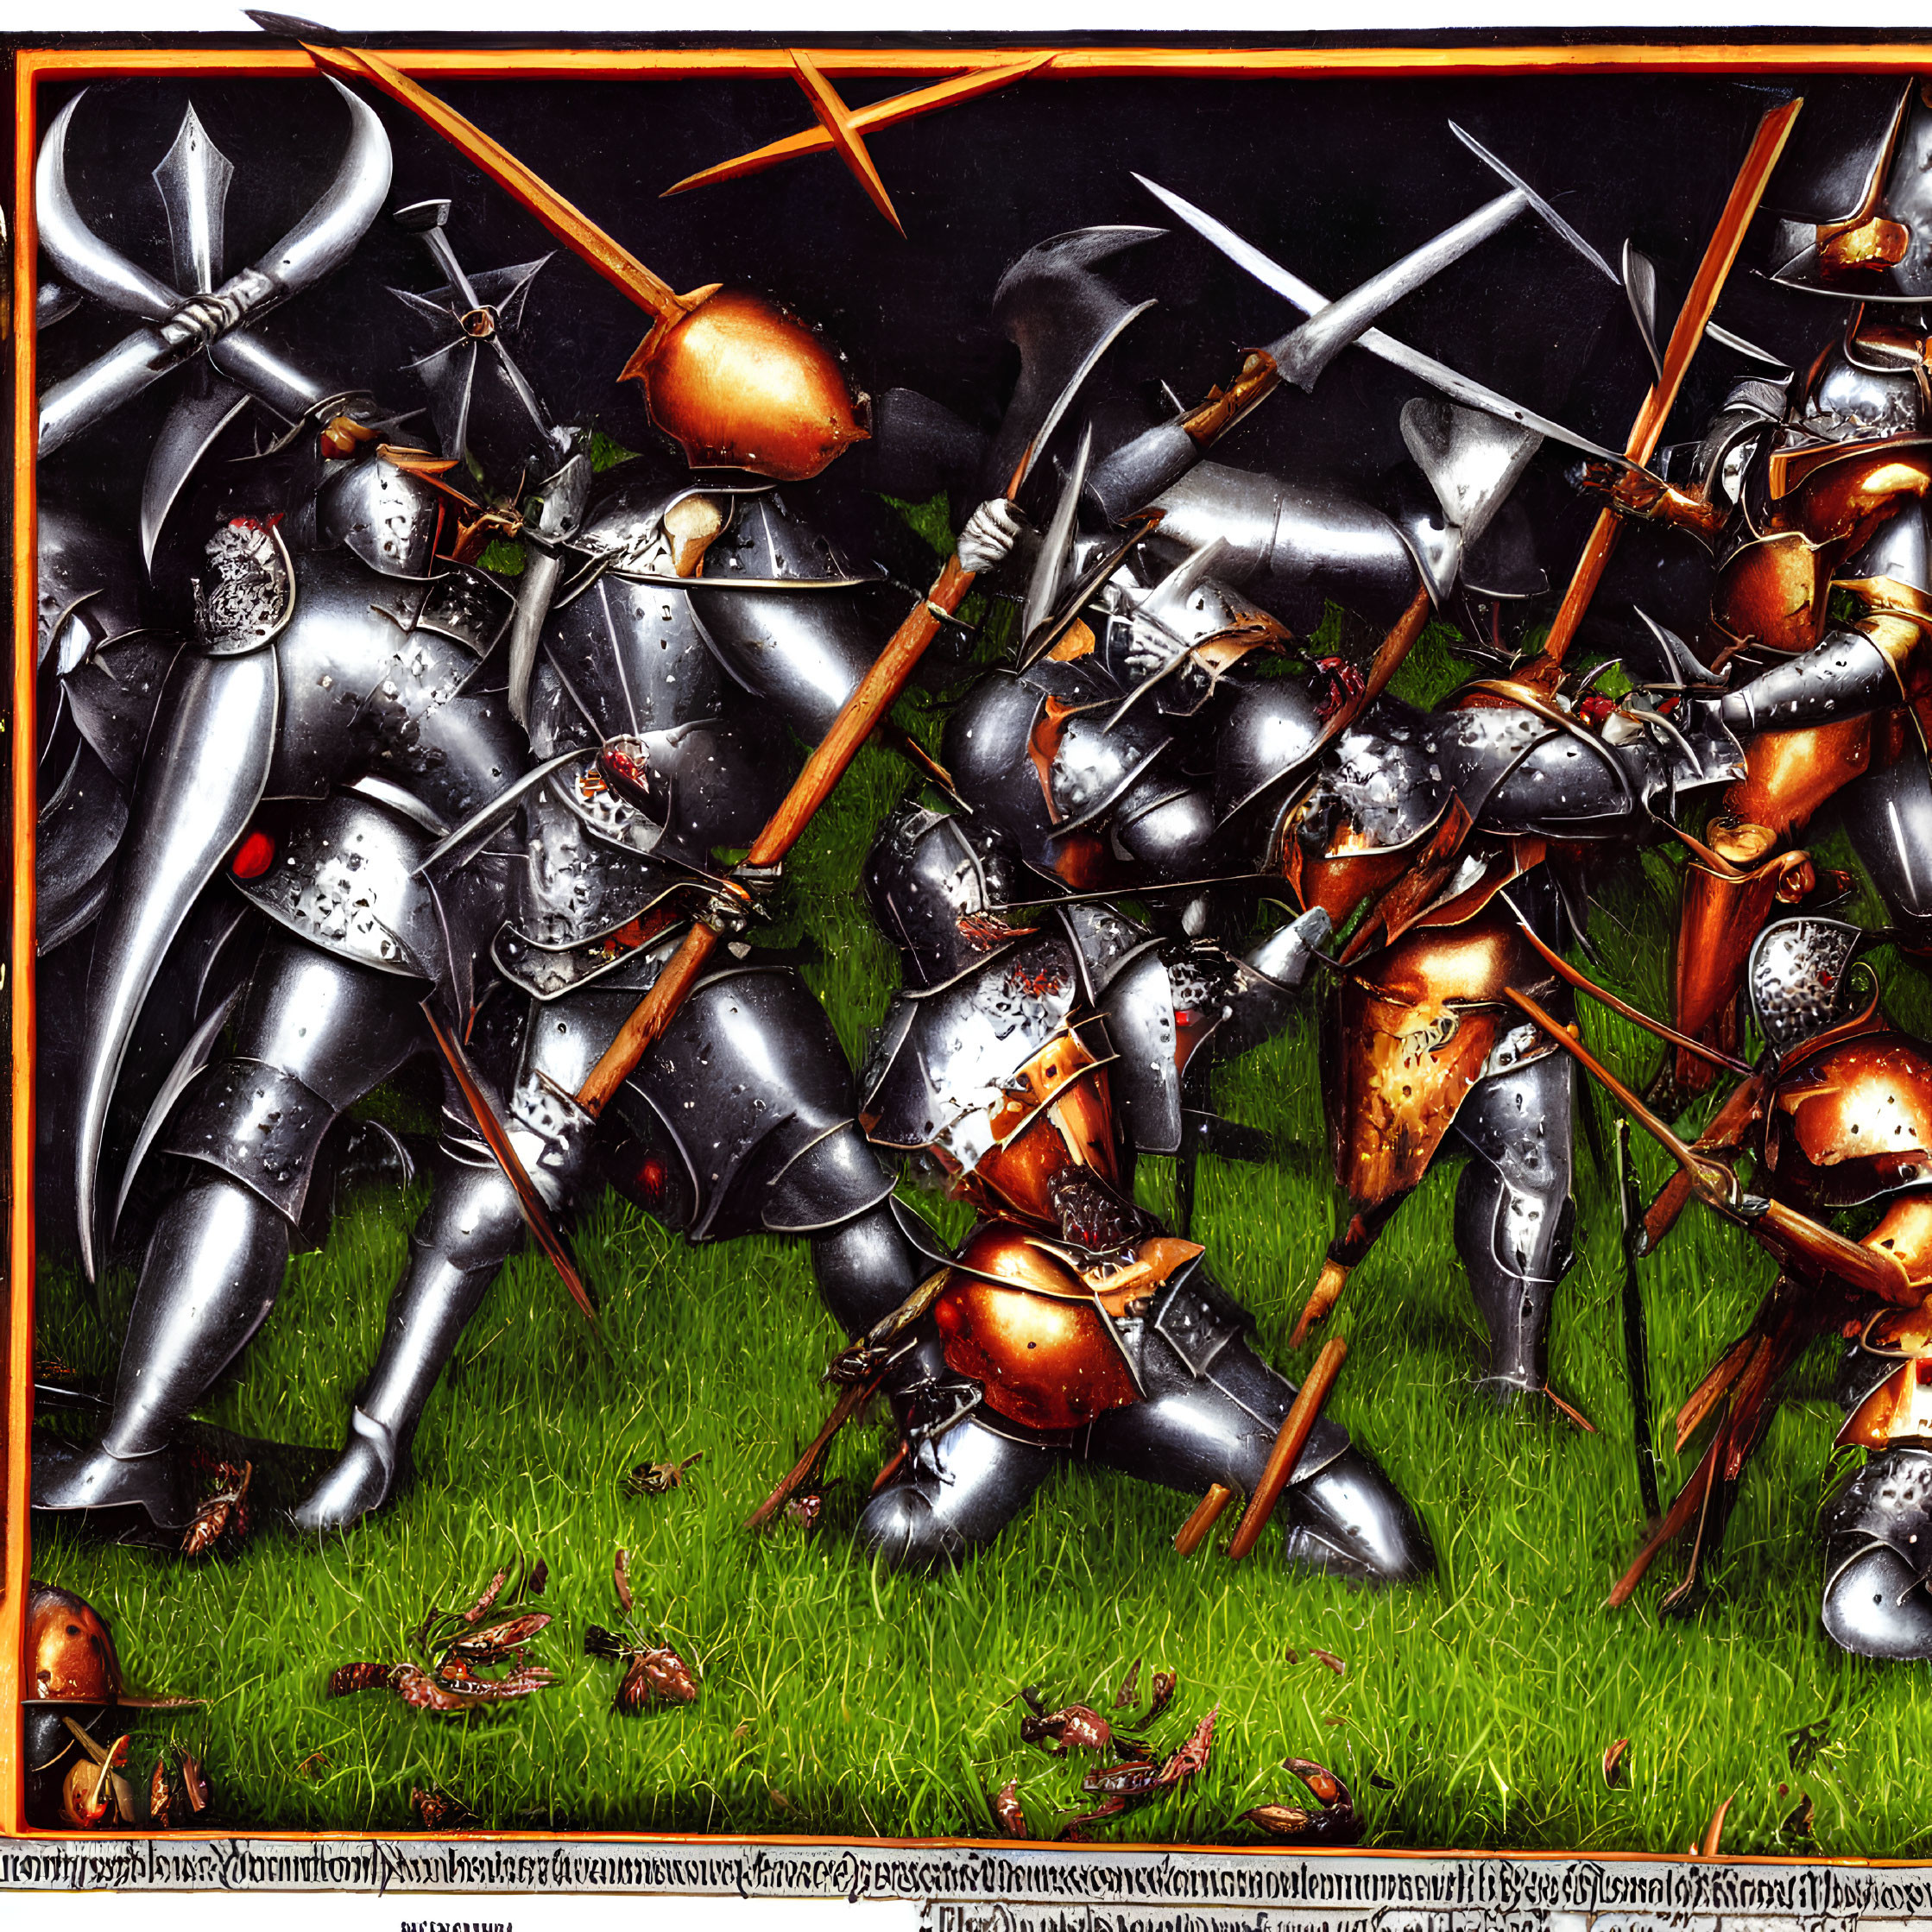 Medieval knights battle scene with swords and shields on grassy field